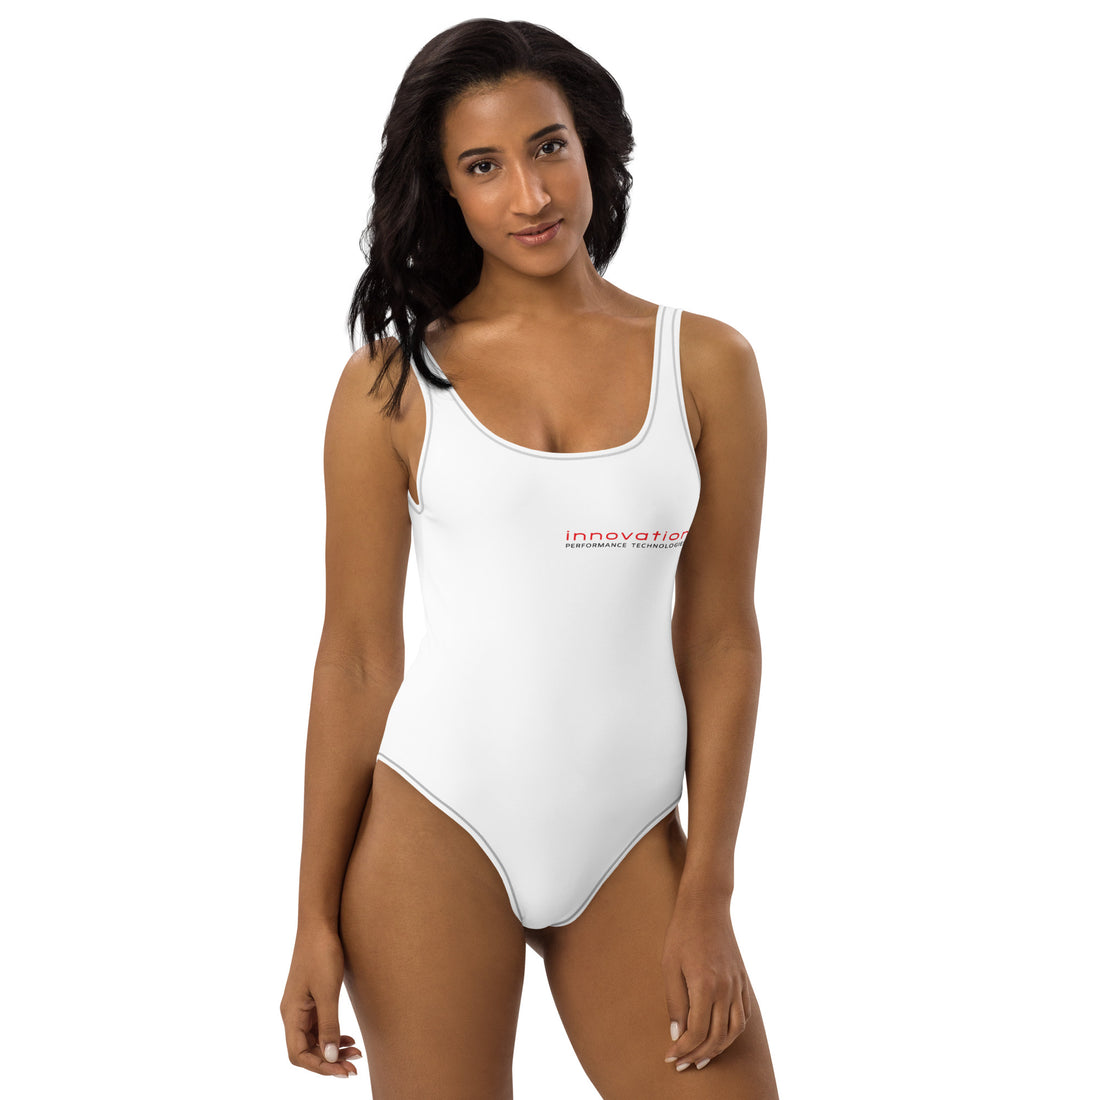 Dive into Innovation: Empower Heroes with IPT Swimsuit